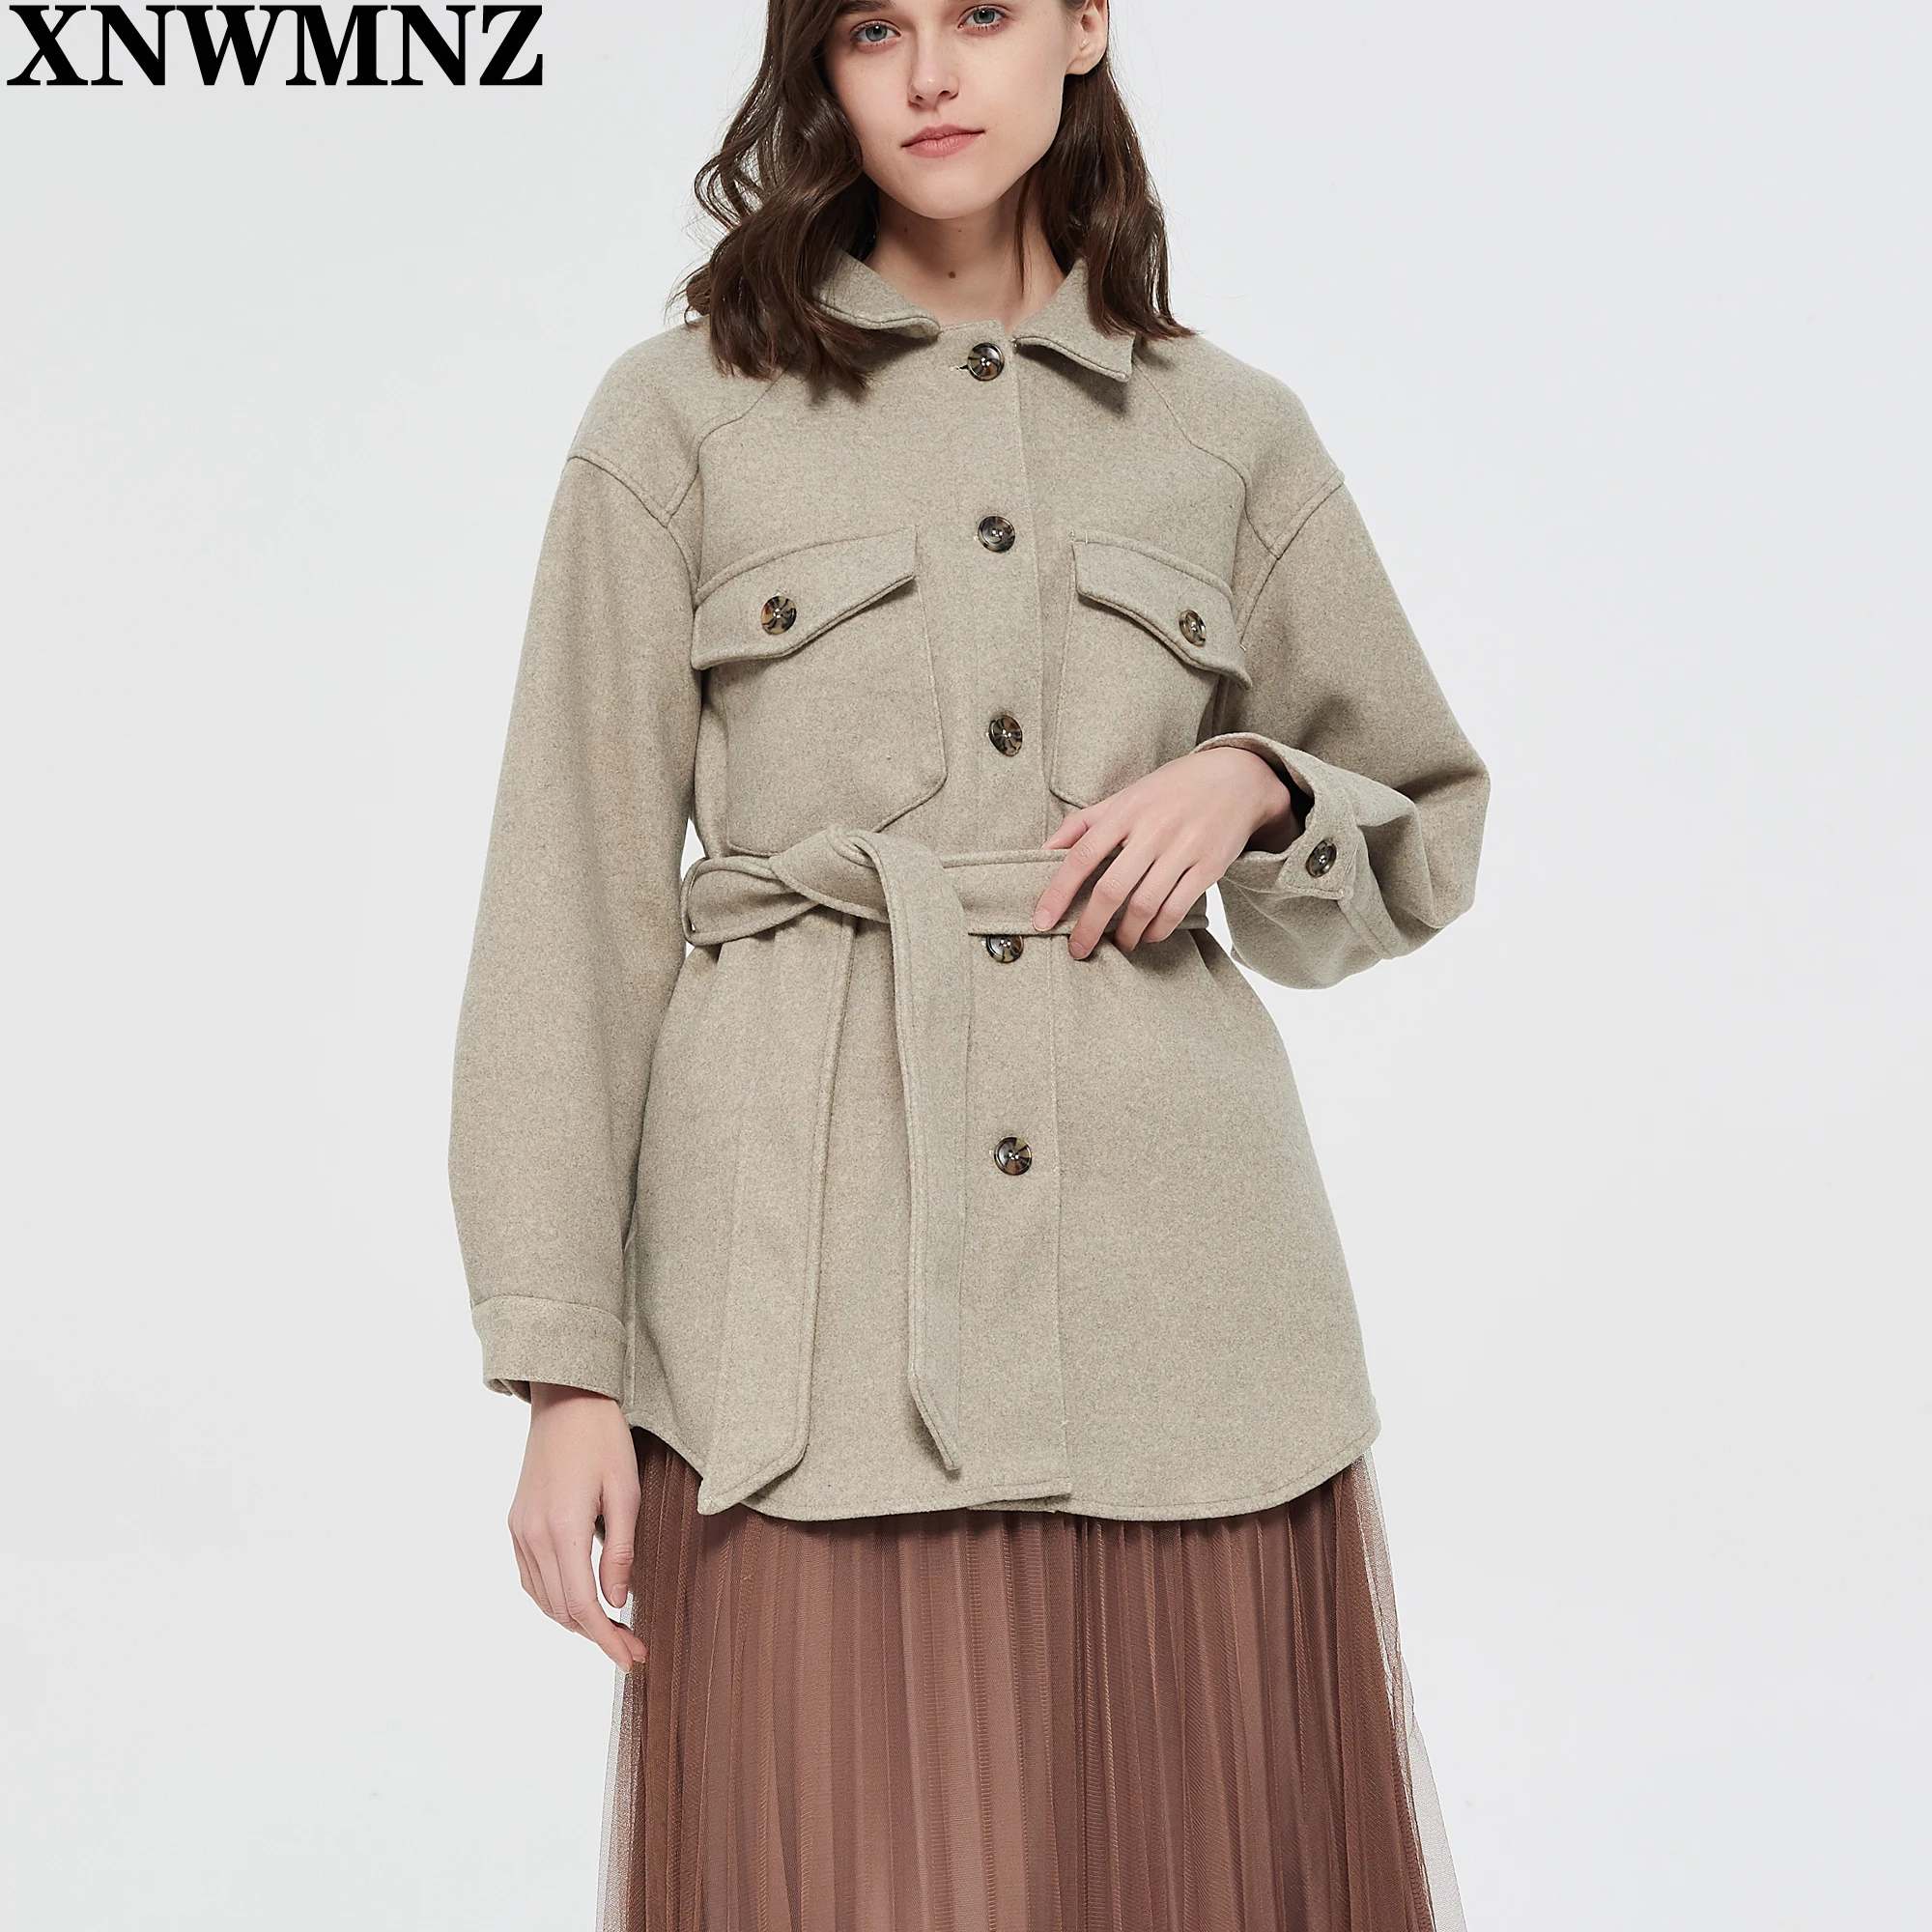 XNWMNZ Women 2021 Fashion With Belt Loose Woolen Jacket Coat Vintage Long Sleeve Side Pockets Female Outerwear Chic Overcoat elegant vintage dresses classy outfits women 2021 fashion spring autumn long sleeve satin yellow dress chic maxi dress